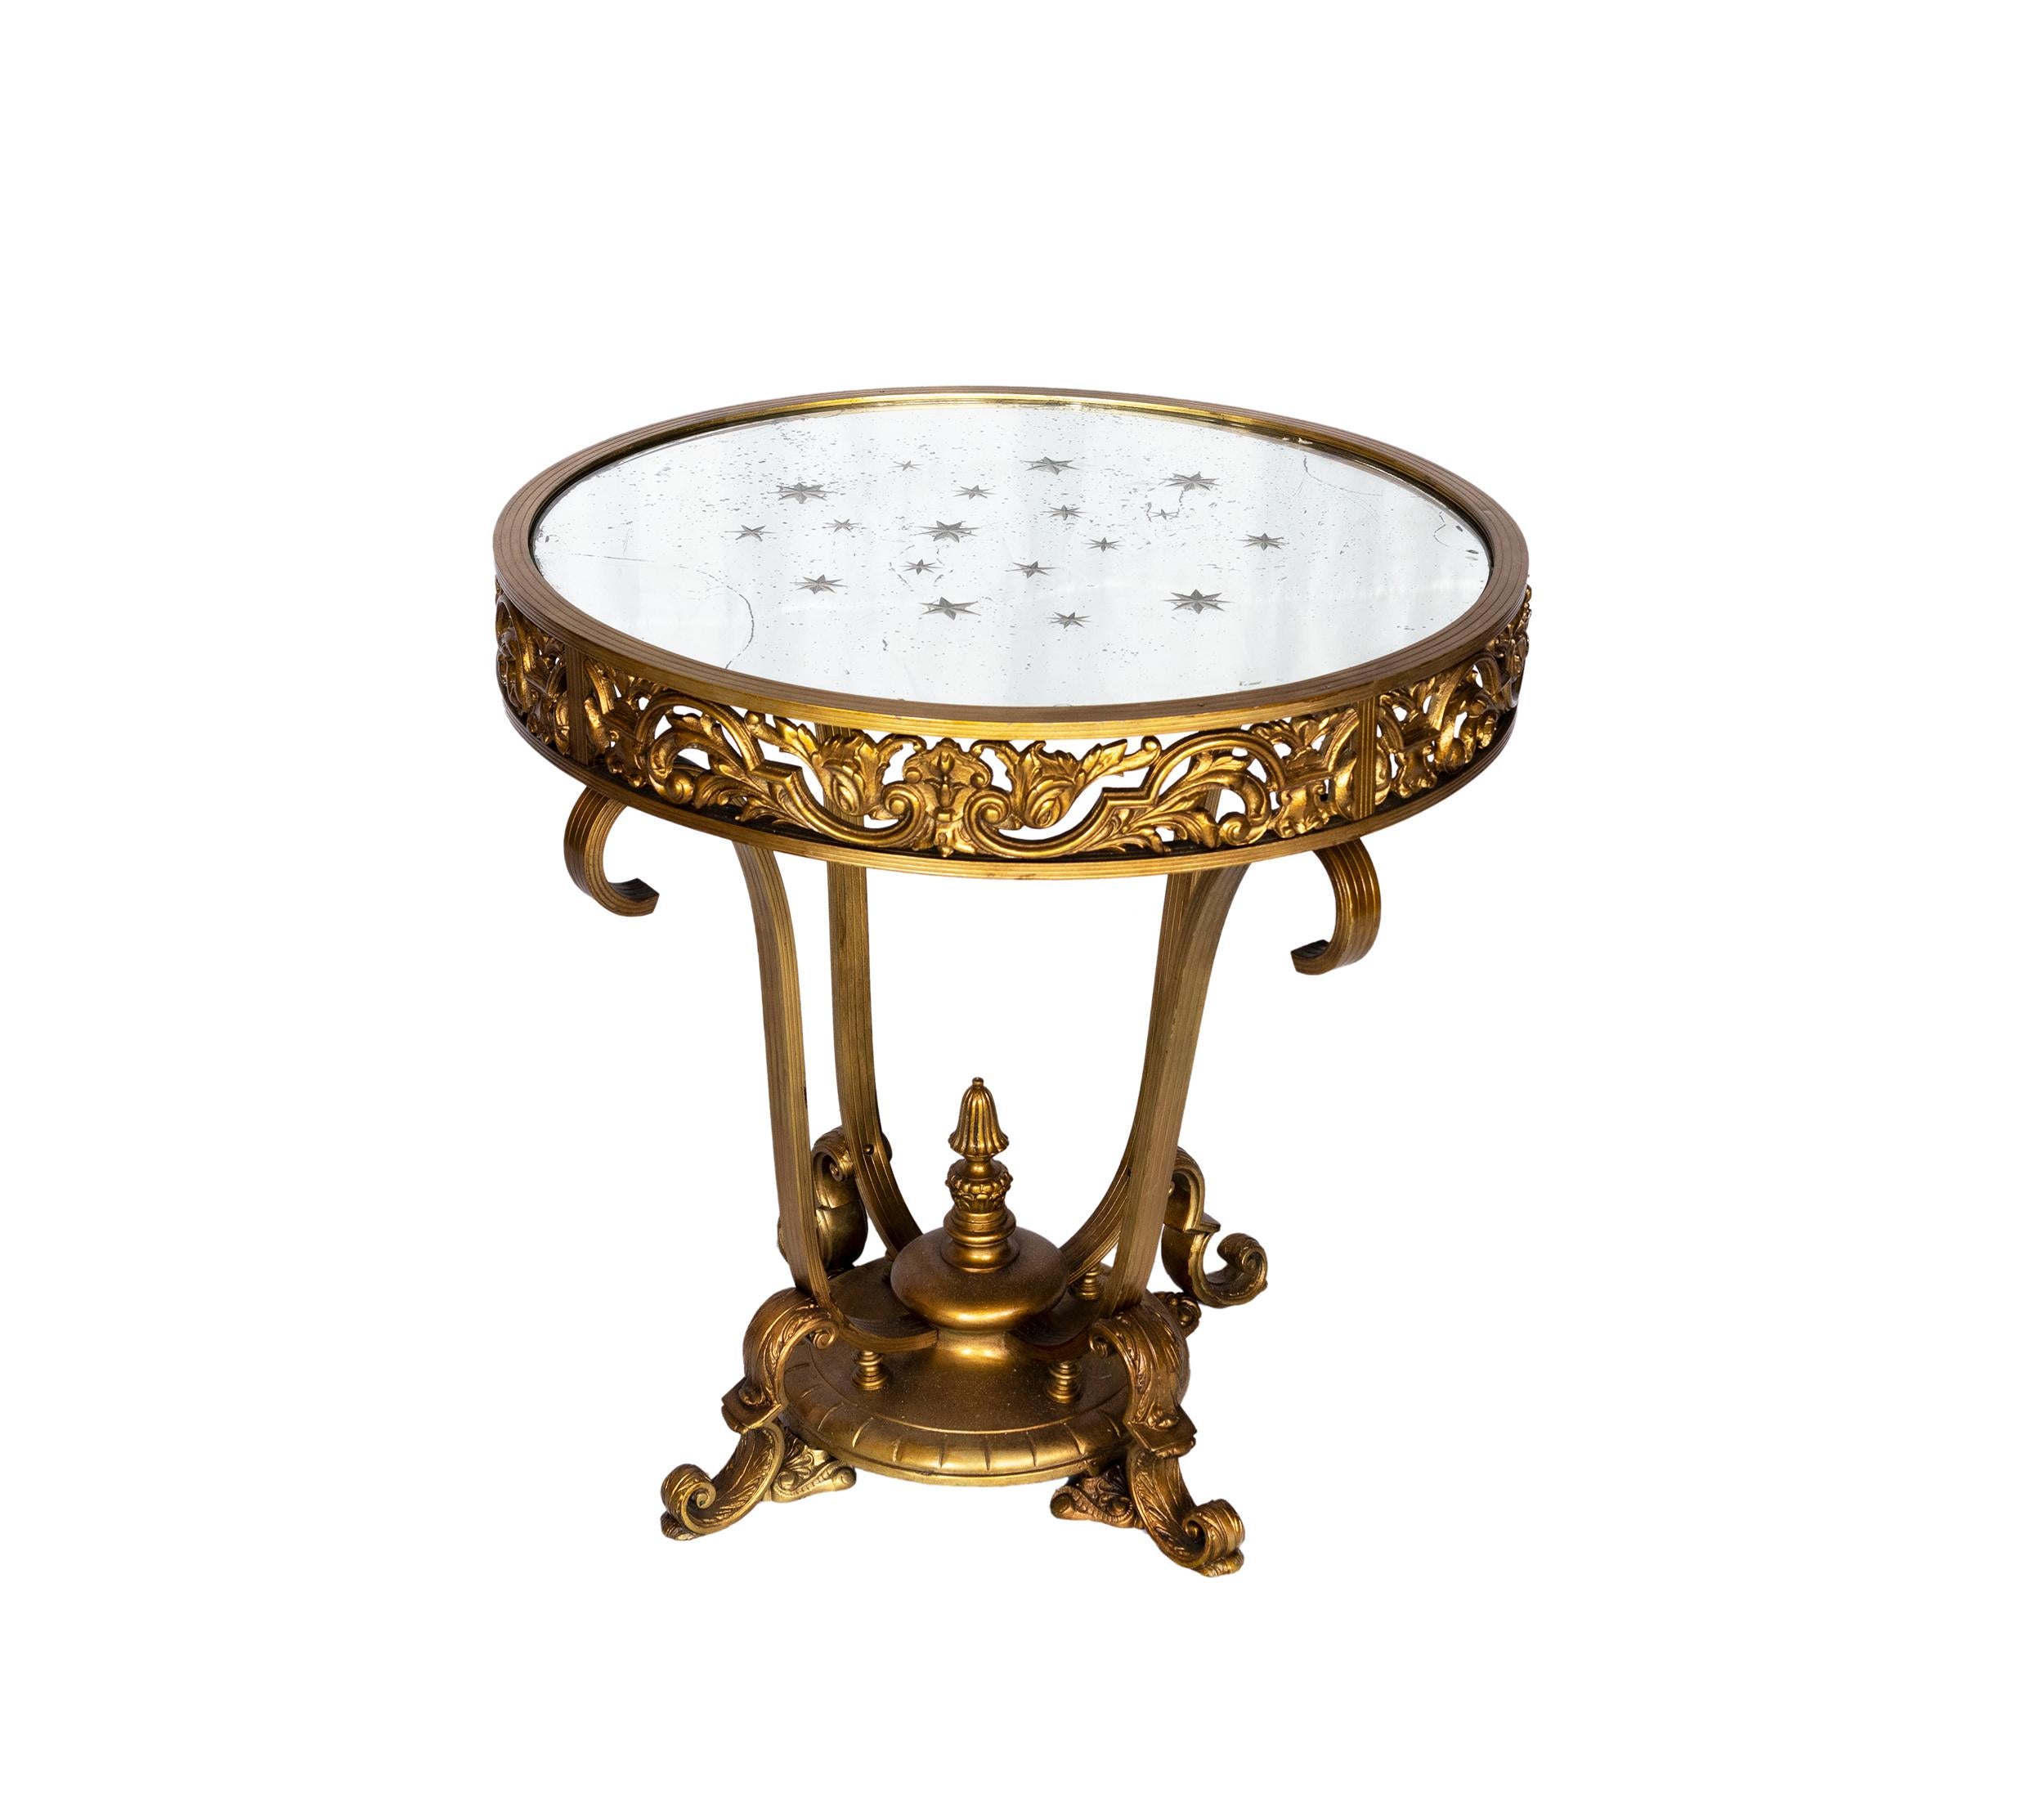 Bronze circular gold coffee table, four short legs and mirrored top with encrusted stars in a modern twist of Louis XV style.

